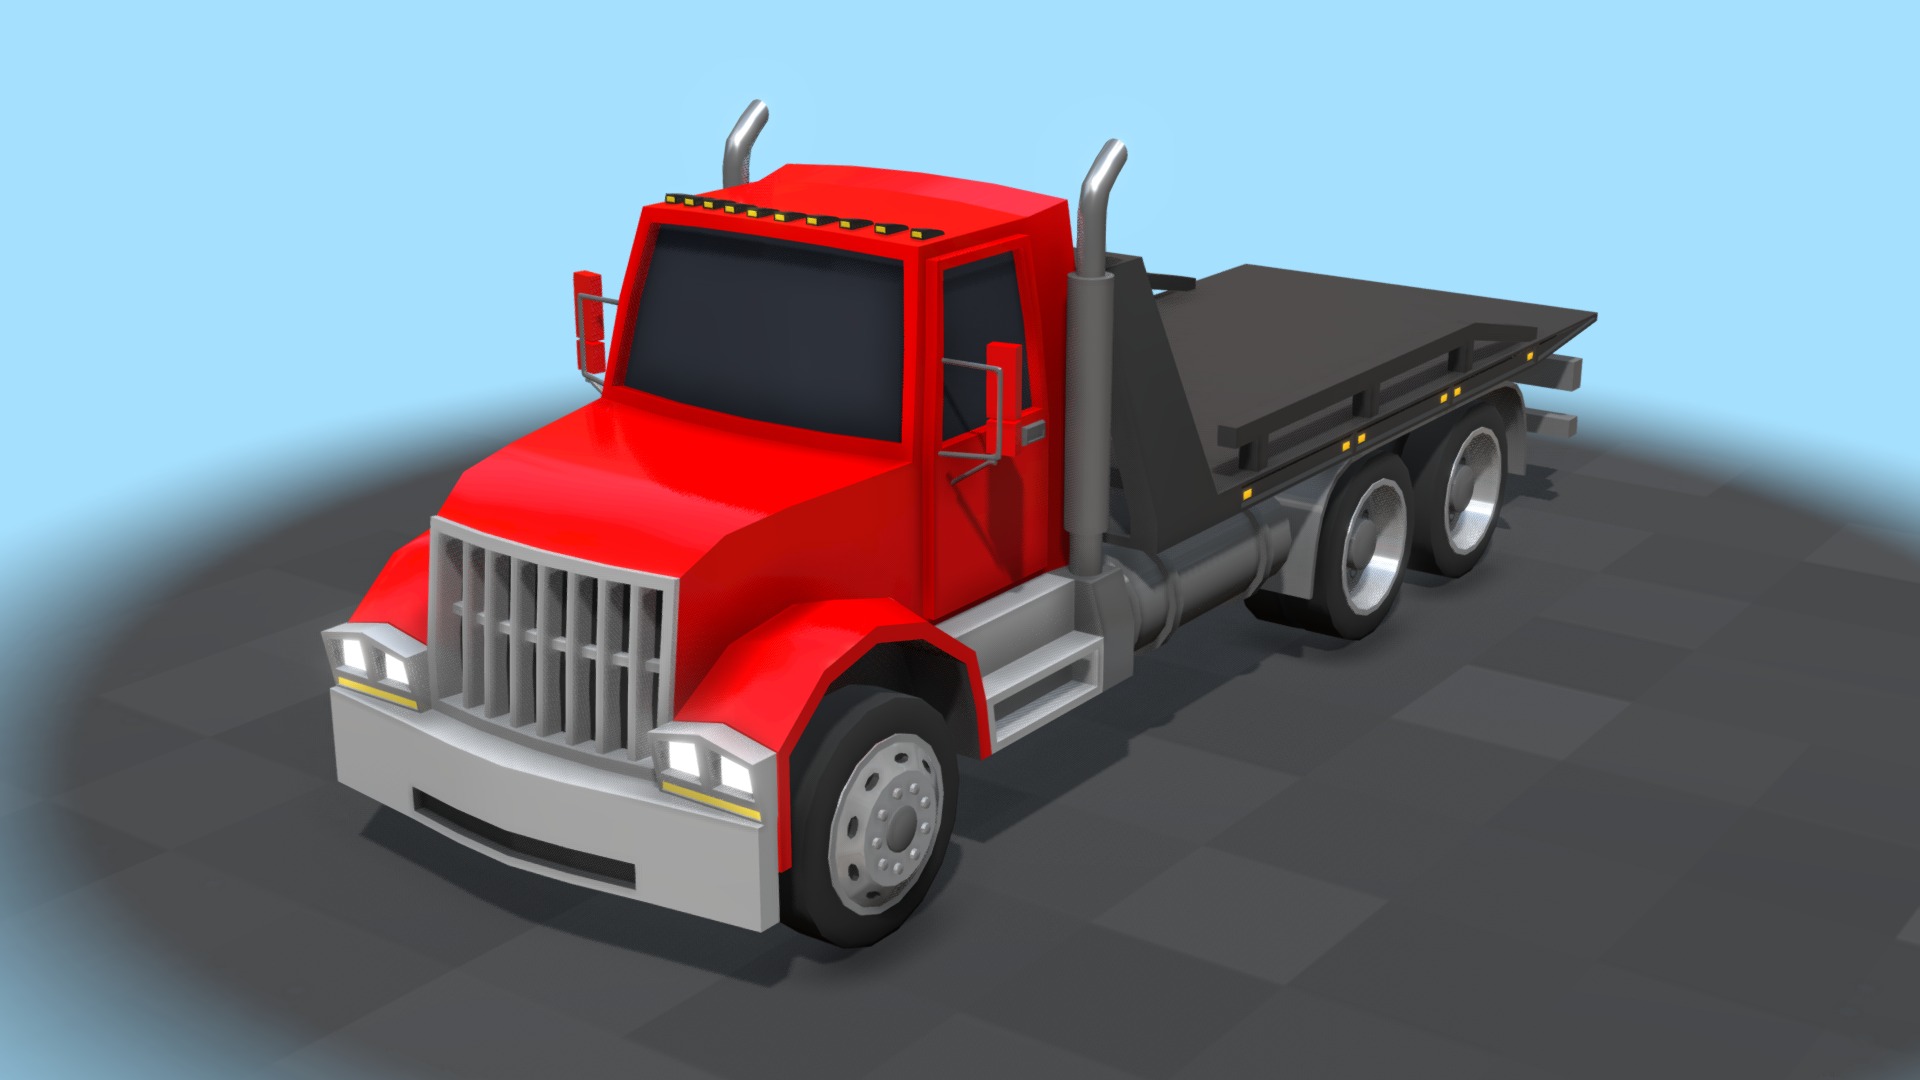 3D model Low Poly Tow Truck - This is a 3D model of the Low Poly Tow Truck. The 3D model is about a red truck with a flatbed.